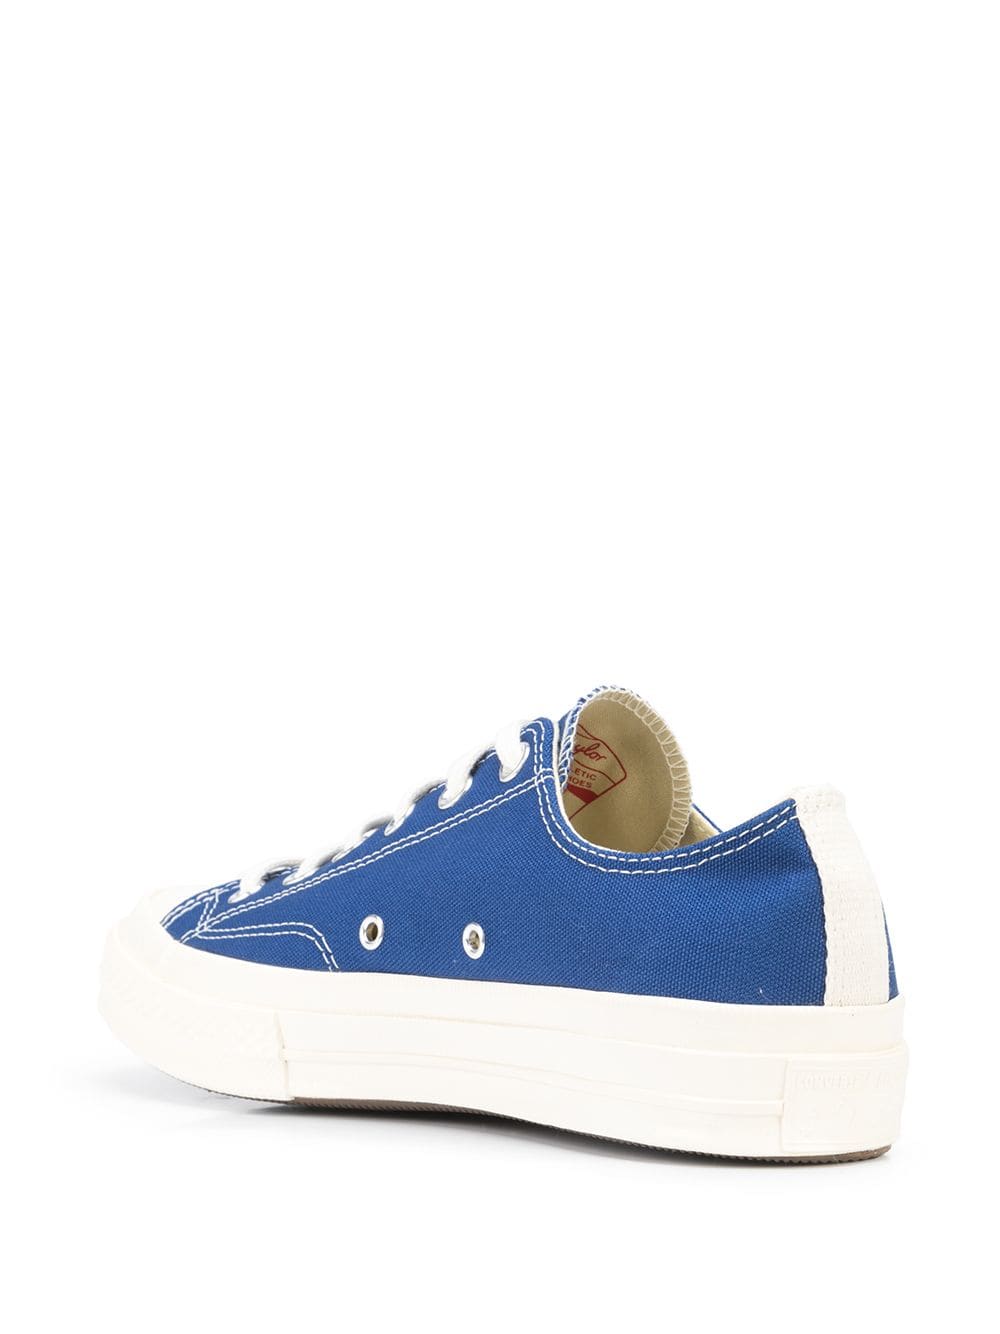 Converse Chuck 70 - blue low-top sneakers